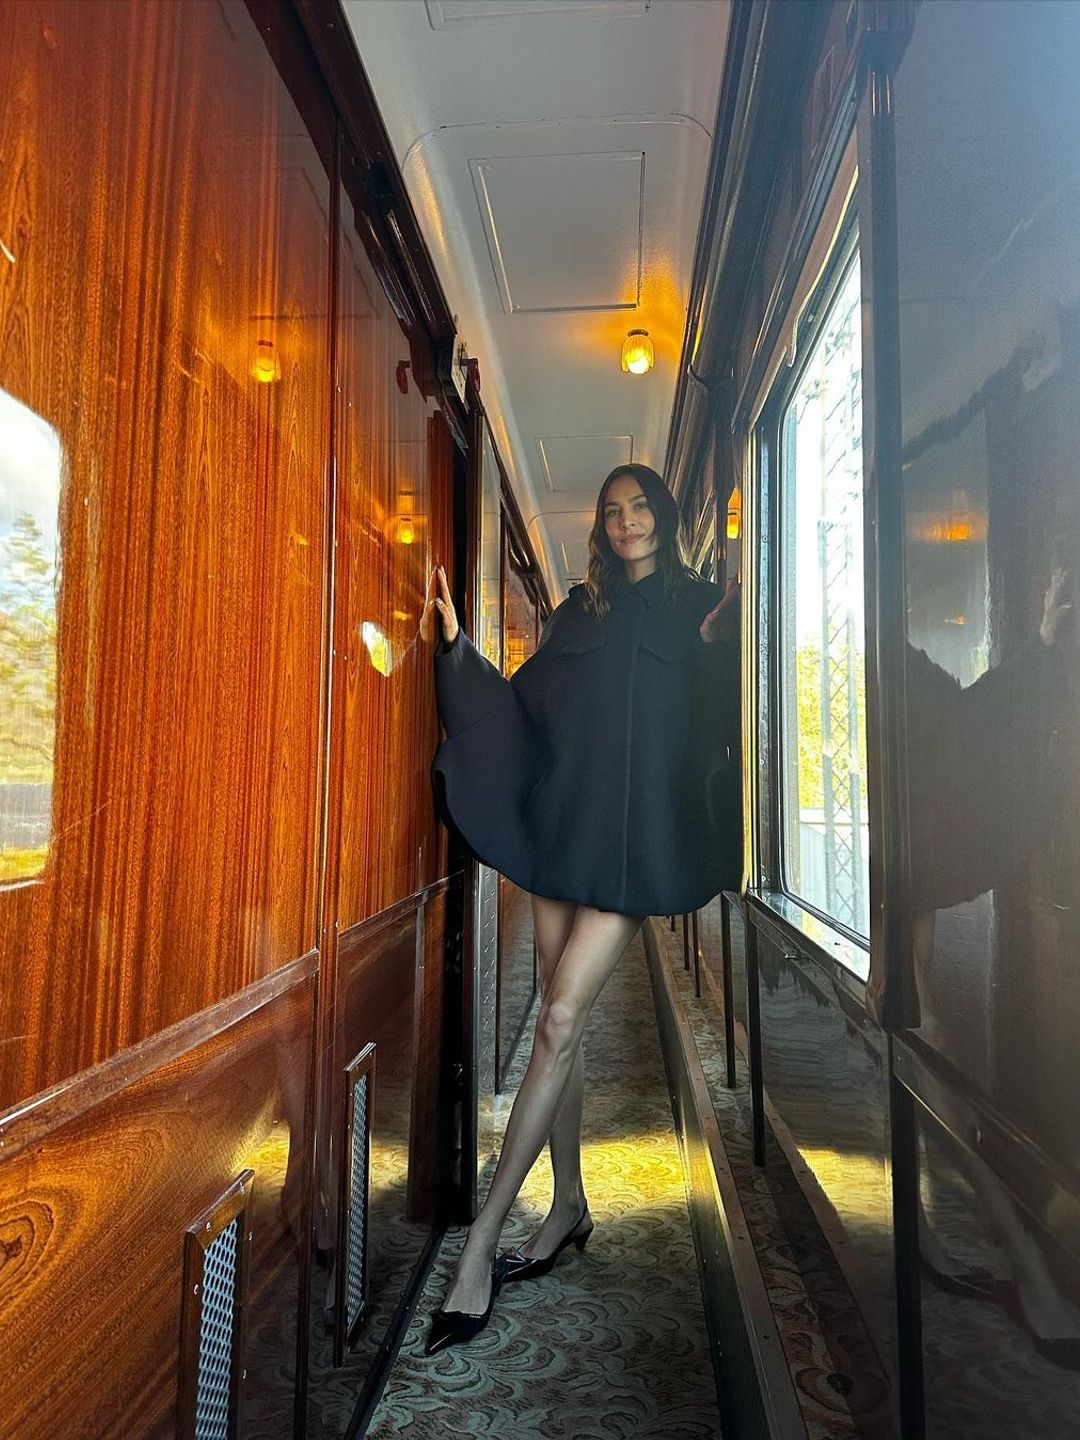 Alexa Chung seemed right at home aboard the luxury train